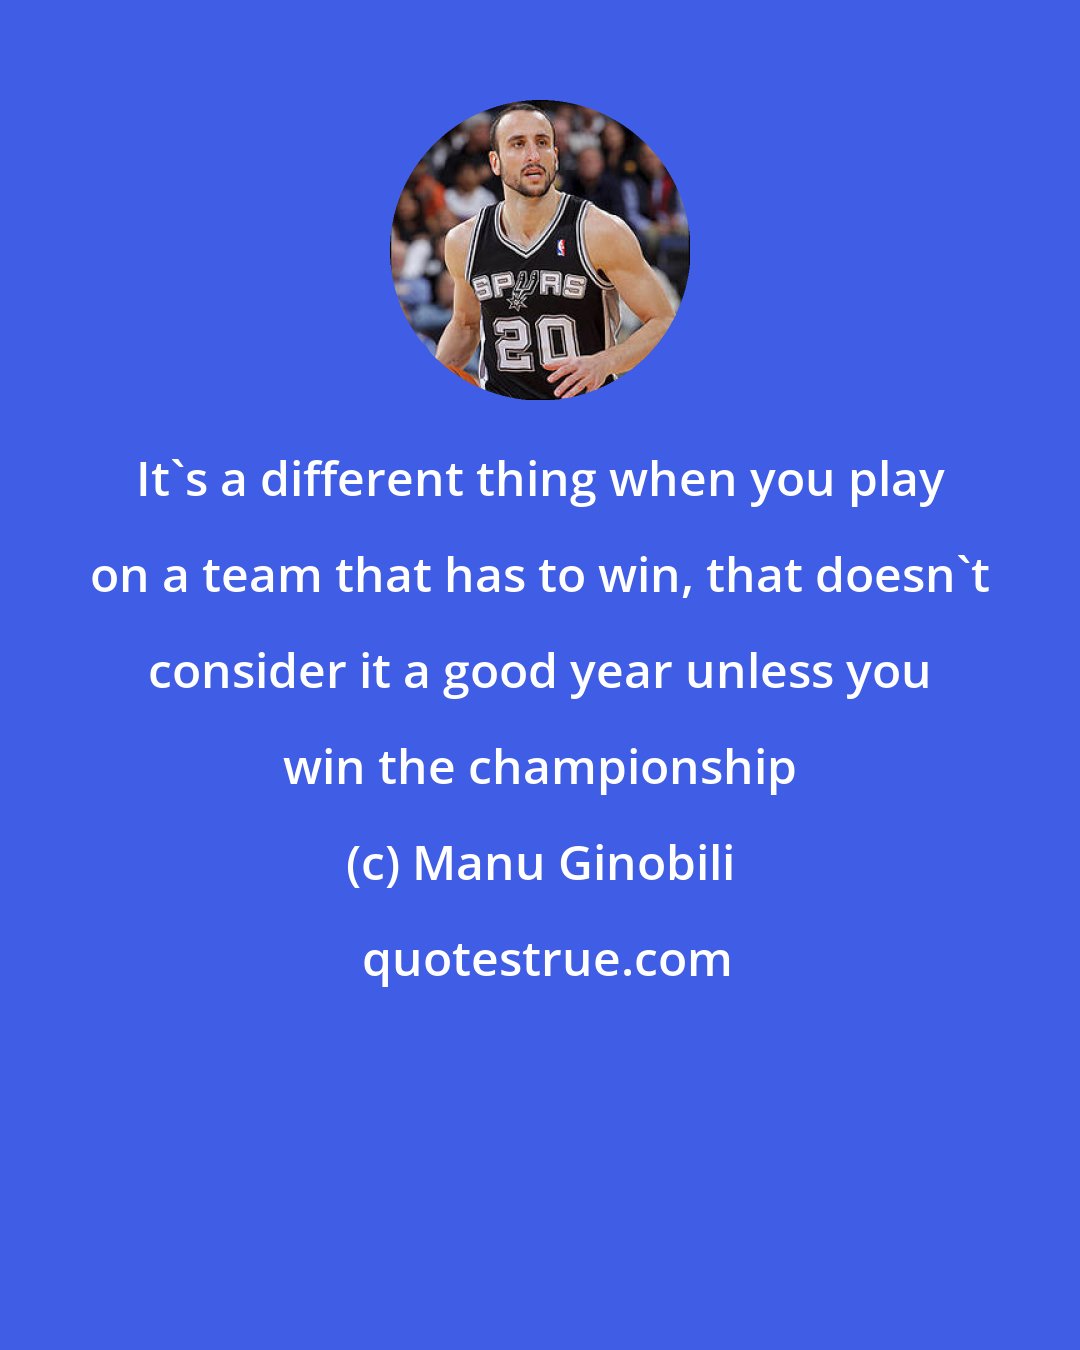 Manu Ginobili: It's a different thing when you play on a team that has to win, that doesn't consider it a good year unless you win the championship